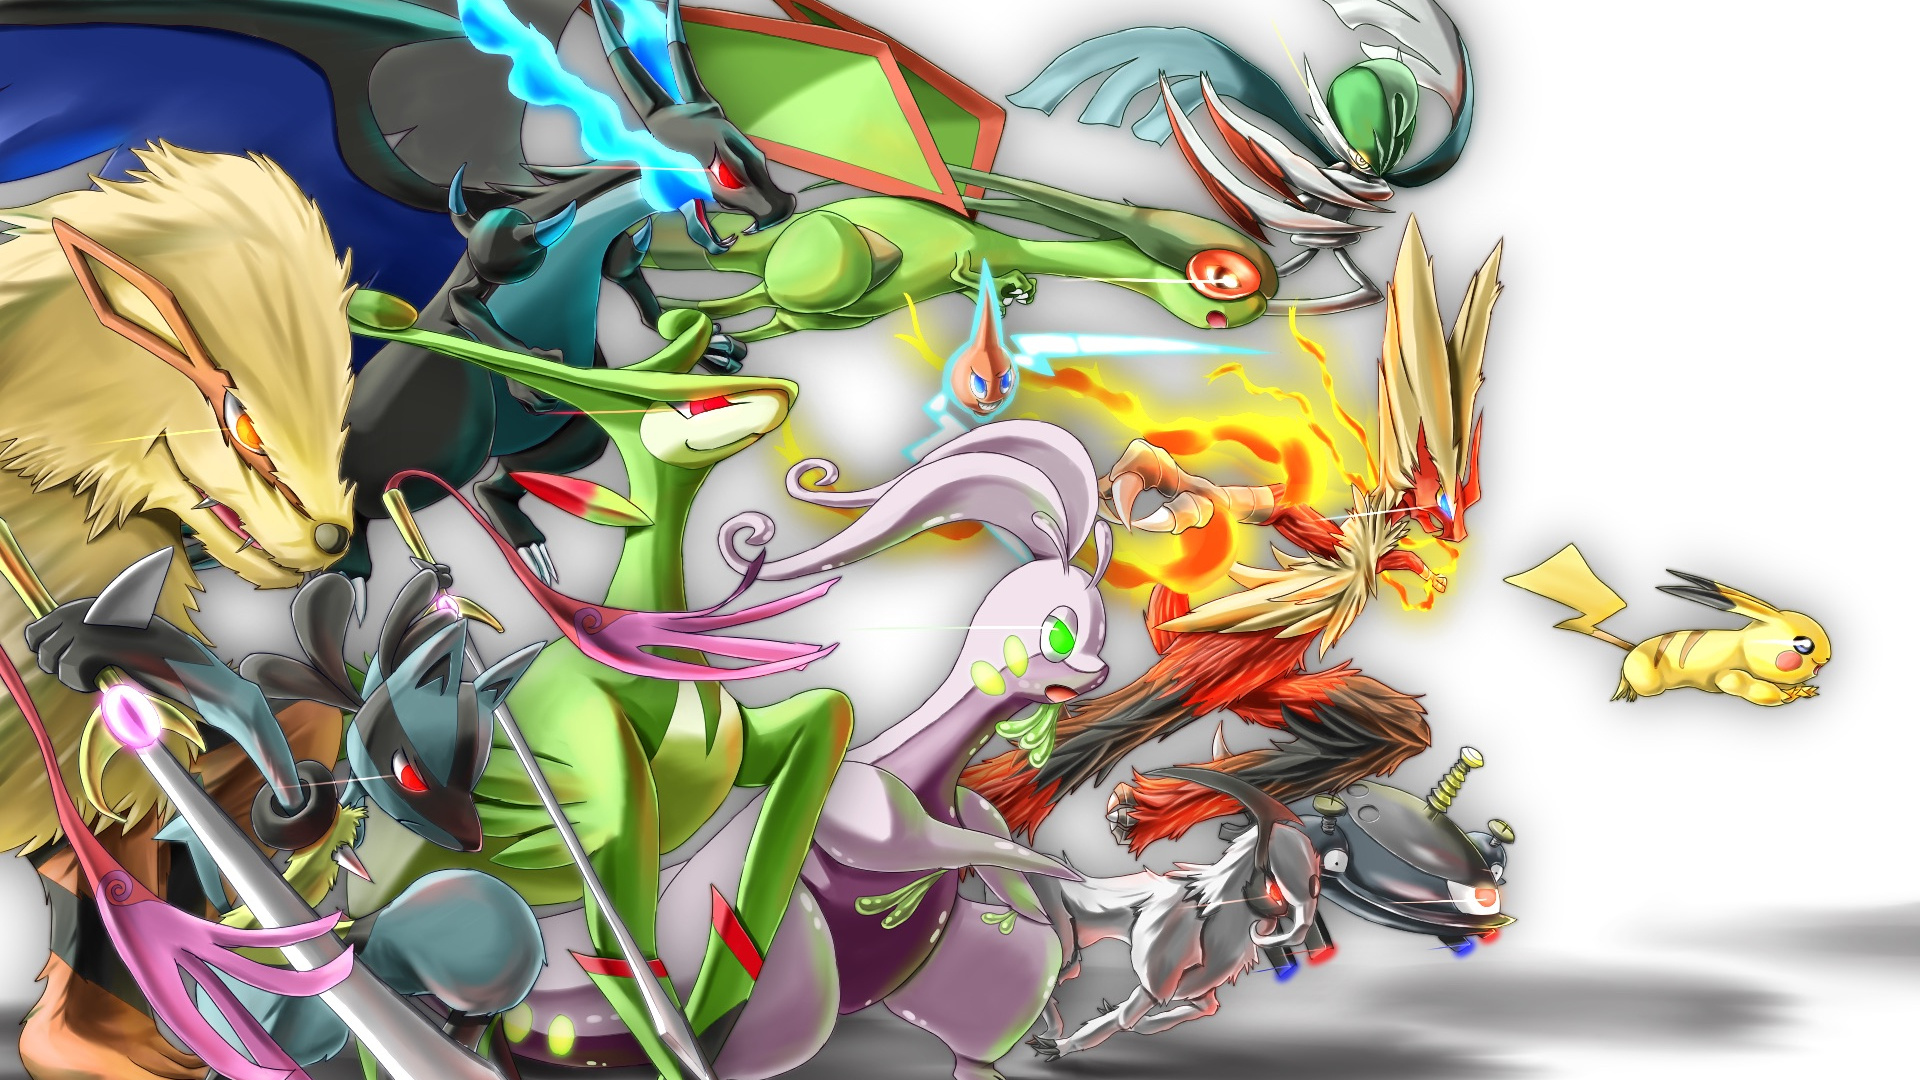 Absol Arcanine Doublade Flygon Gallade, HD wallpapers, Wide range of choices, Versatile options, 1920x1080 Full HD Desktop